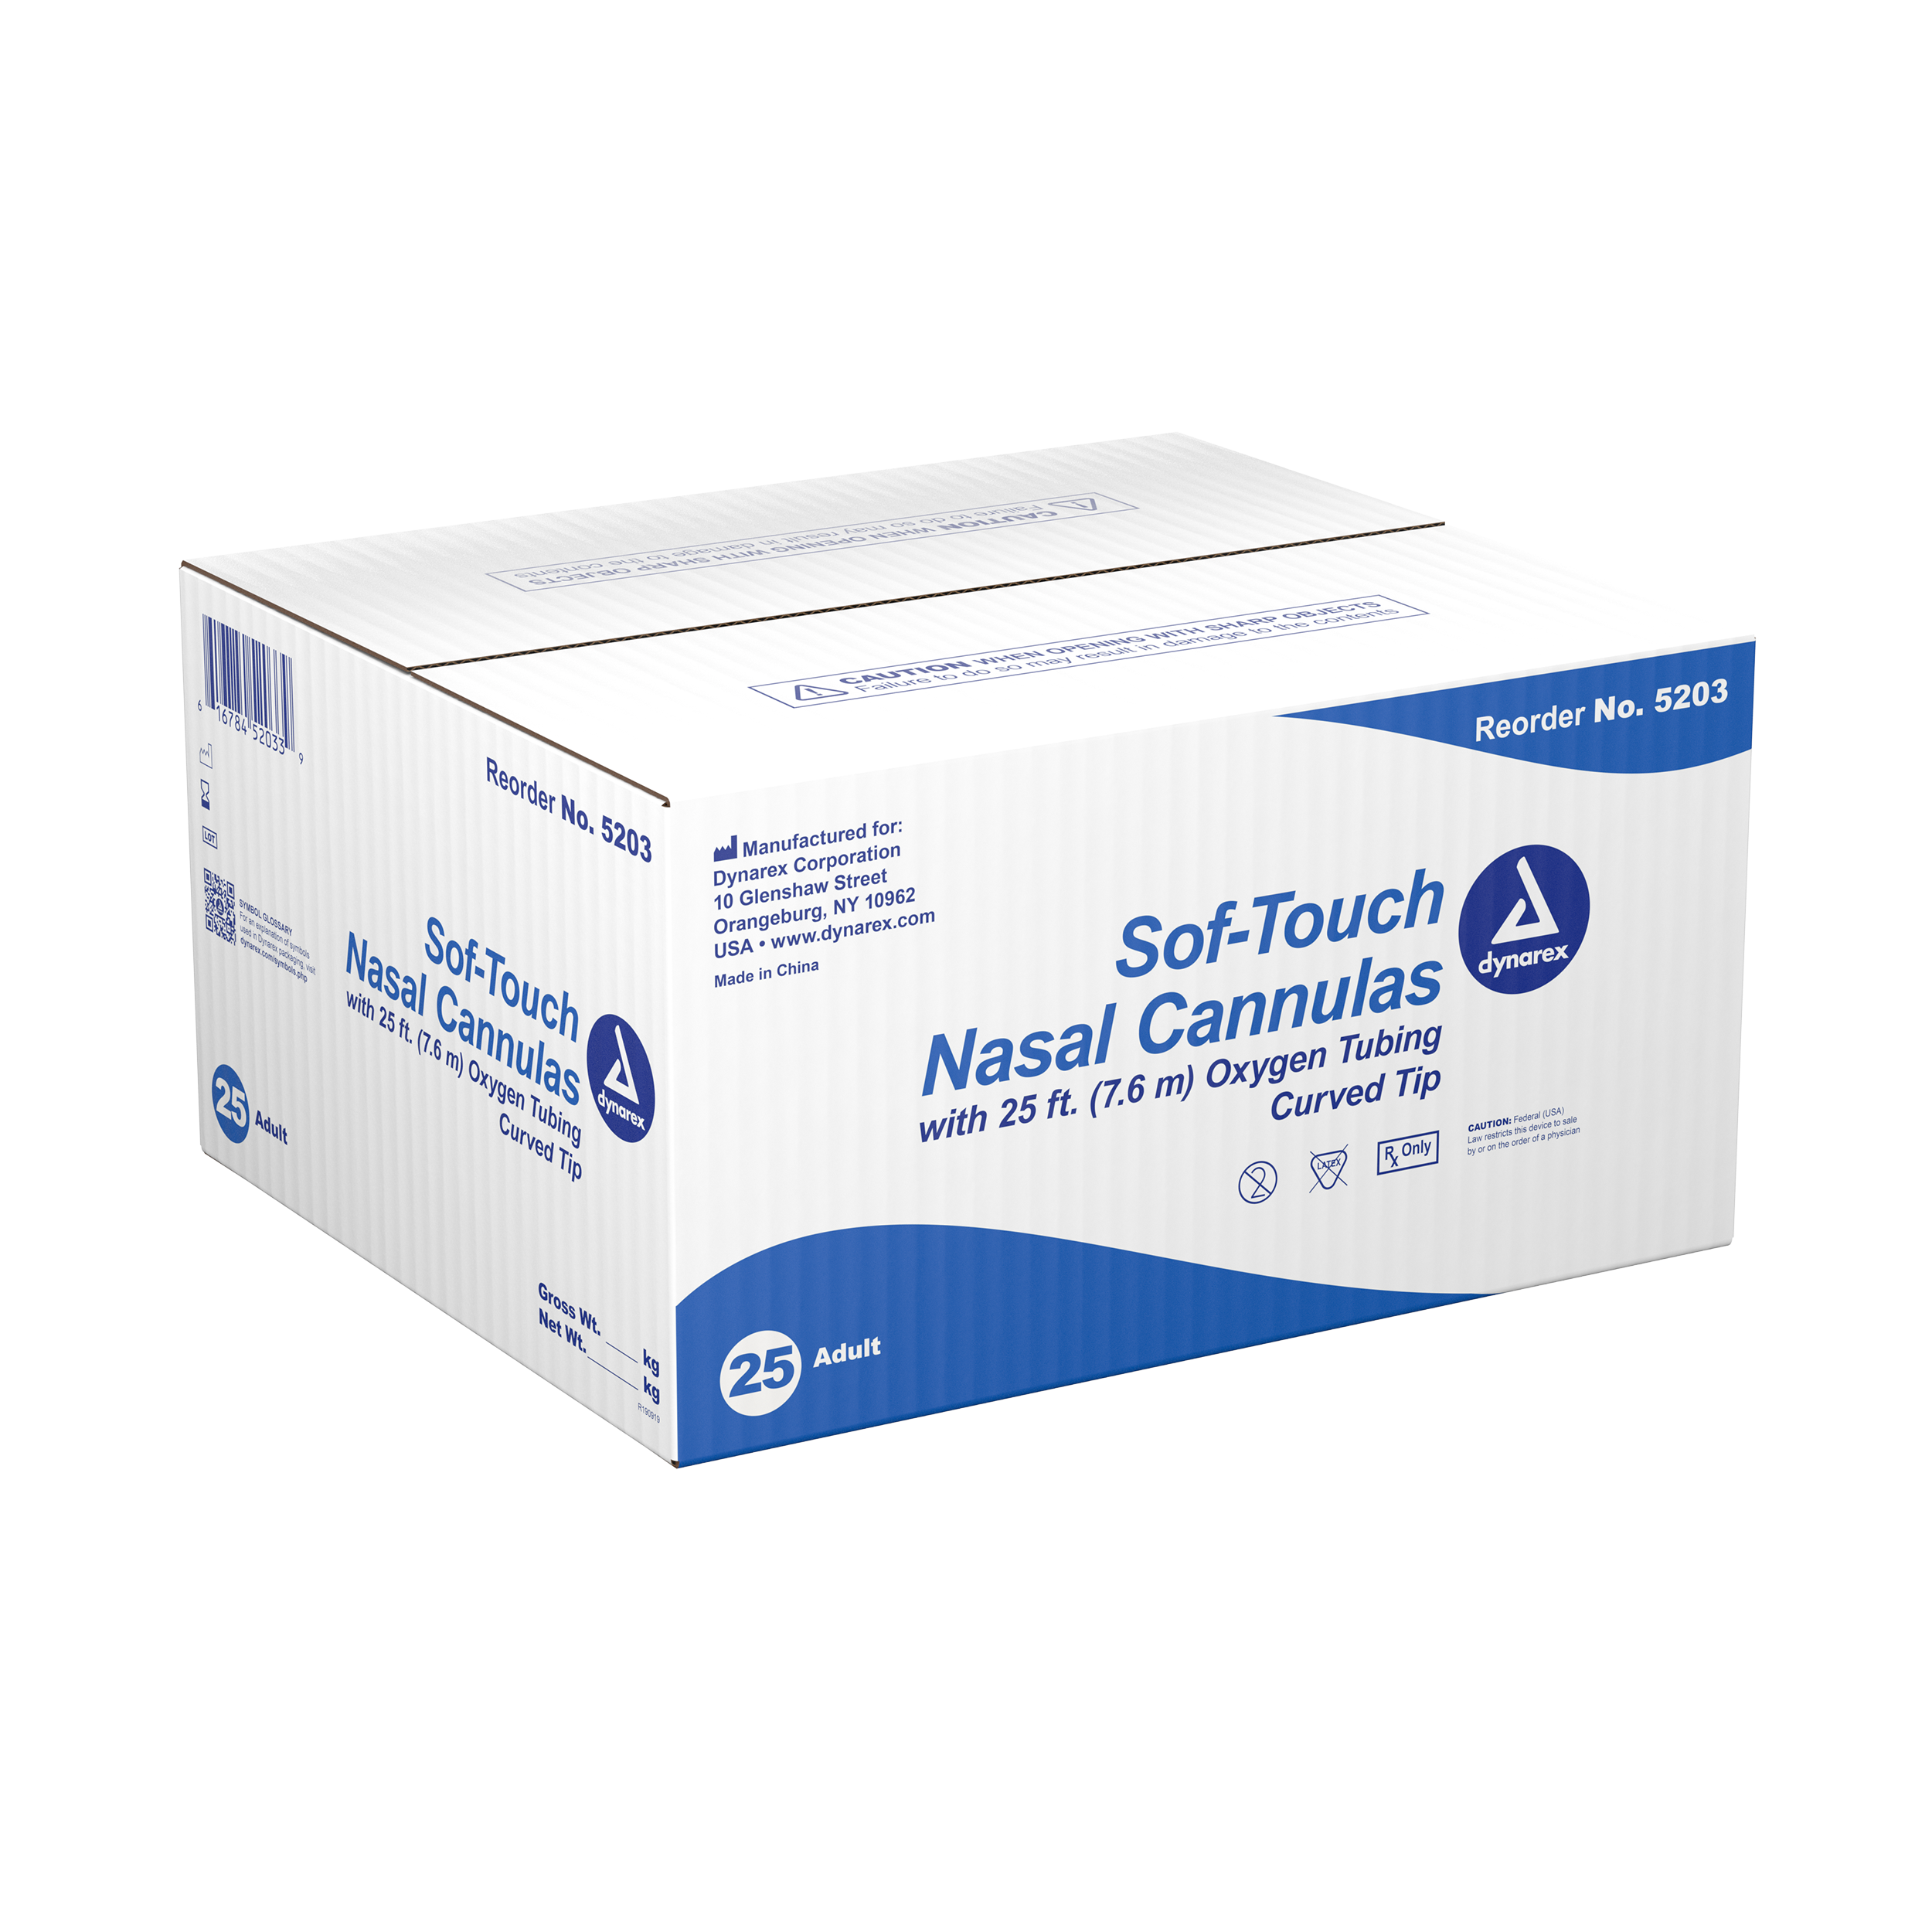 Sof-touch Nasal Cannulas - Adult - 25ft Adult - 25 Units